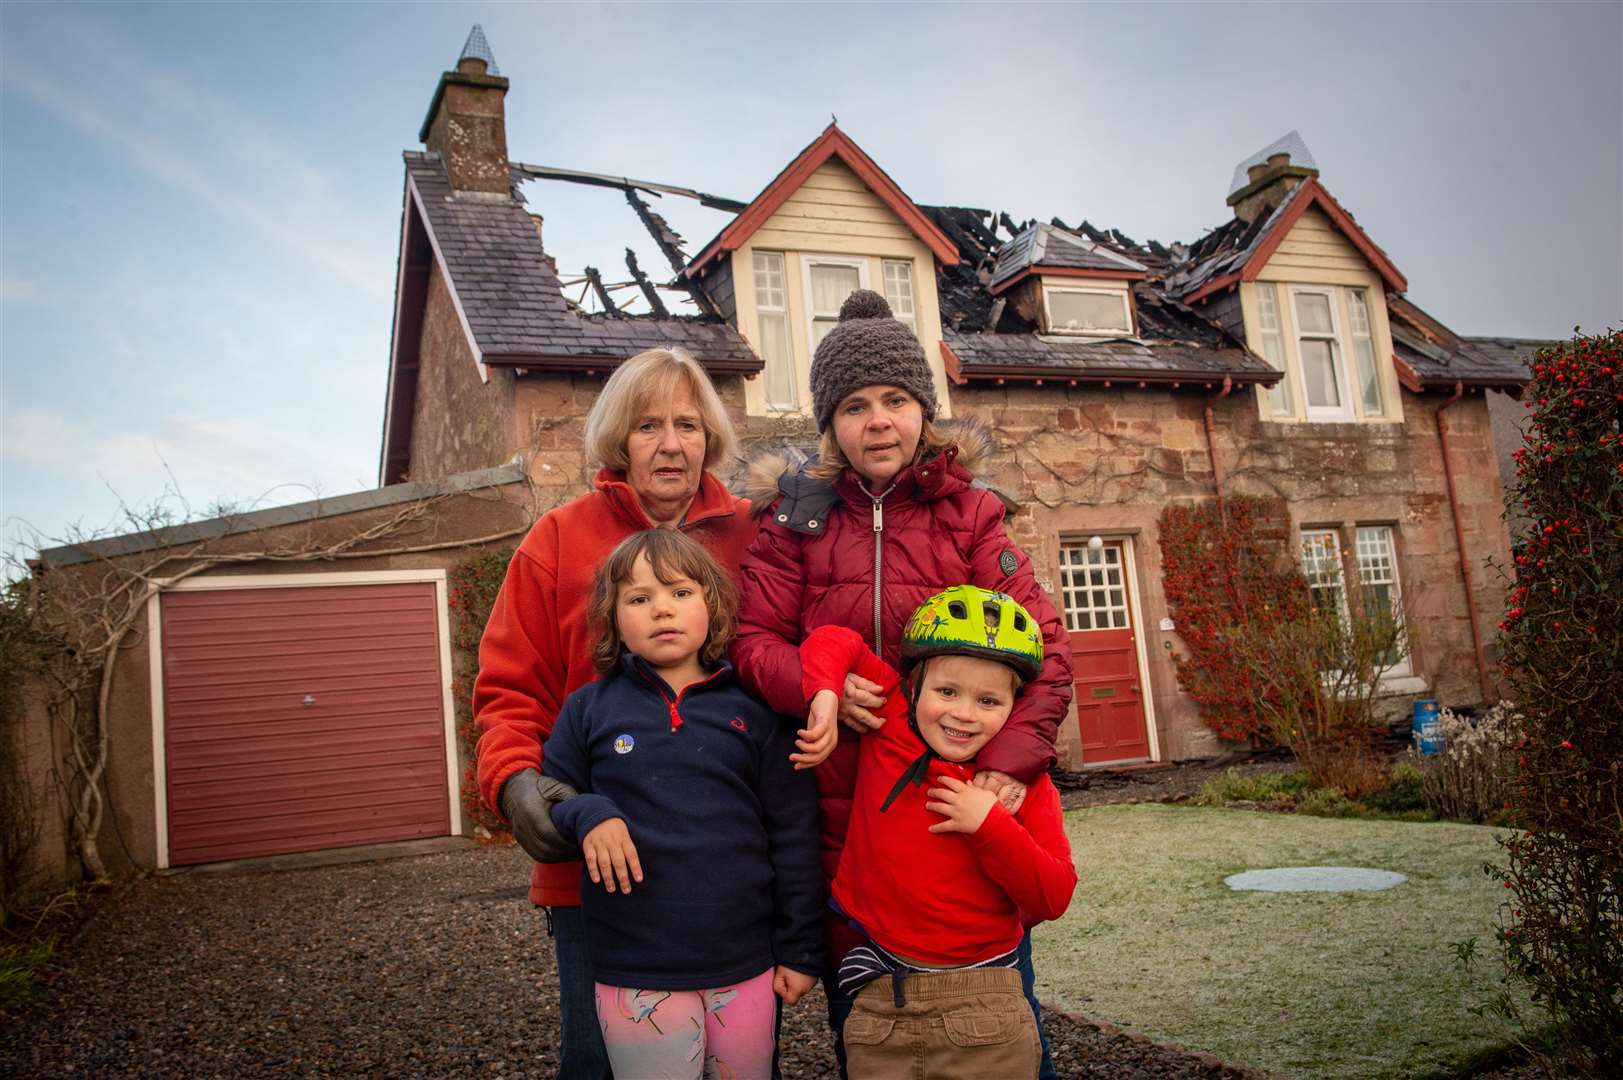 Lois MacDonell, Penelope MacDonell, (front) Vivienne DeJesus and Mark DeJesus were grateful for community support after the fire and the role alarms played in alerting them to the danger. Picture: Callum Mackay